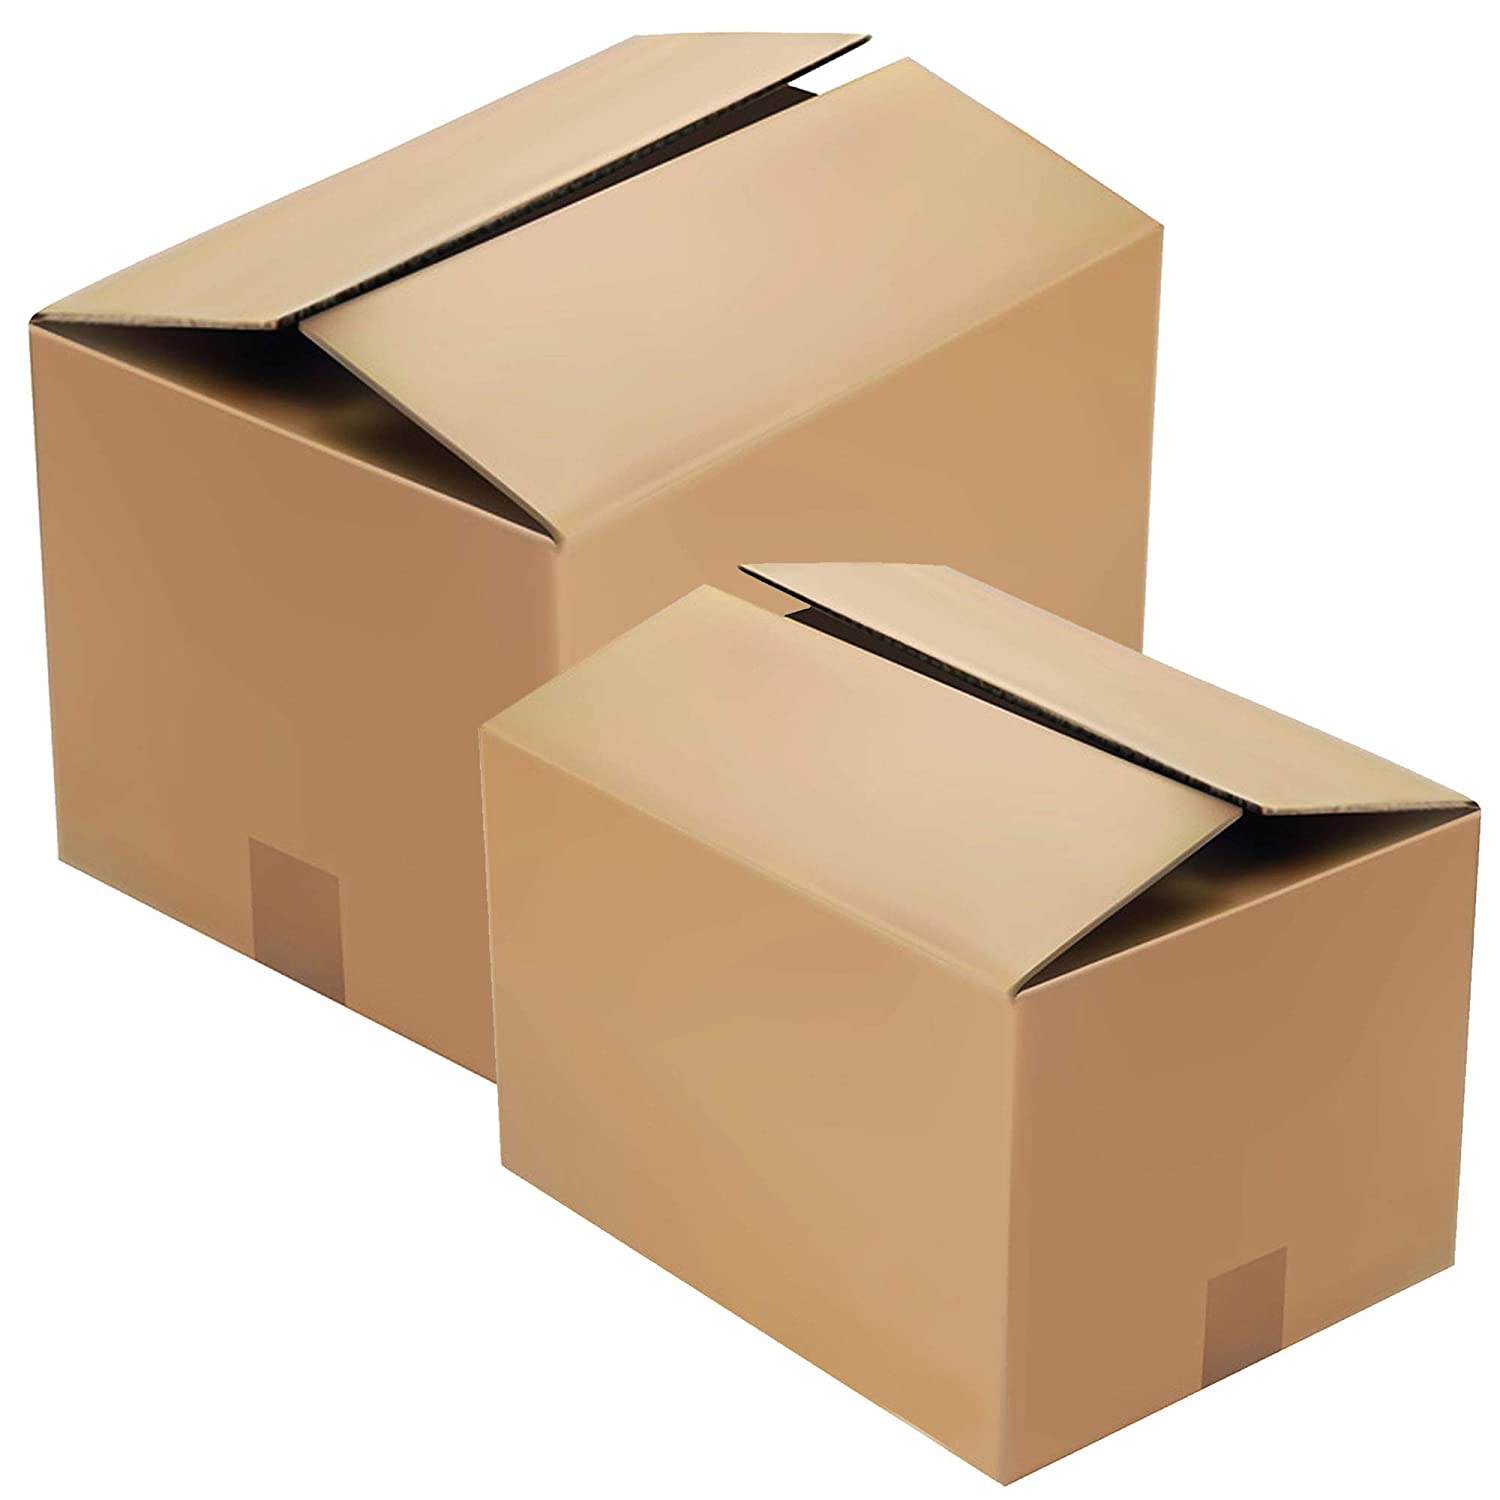 OUTER PACKING MATERIALS FOR VEGETABLES, FRUITS, FLOWERS AND CUT FOLIAGE